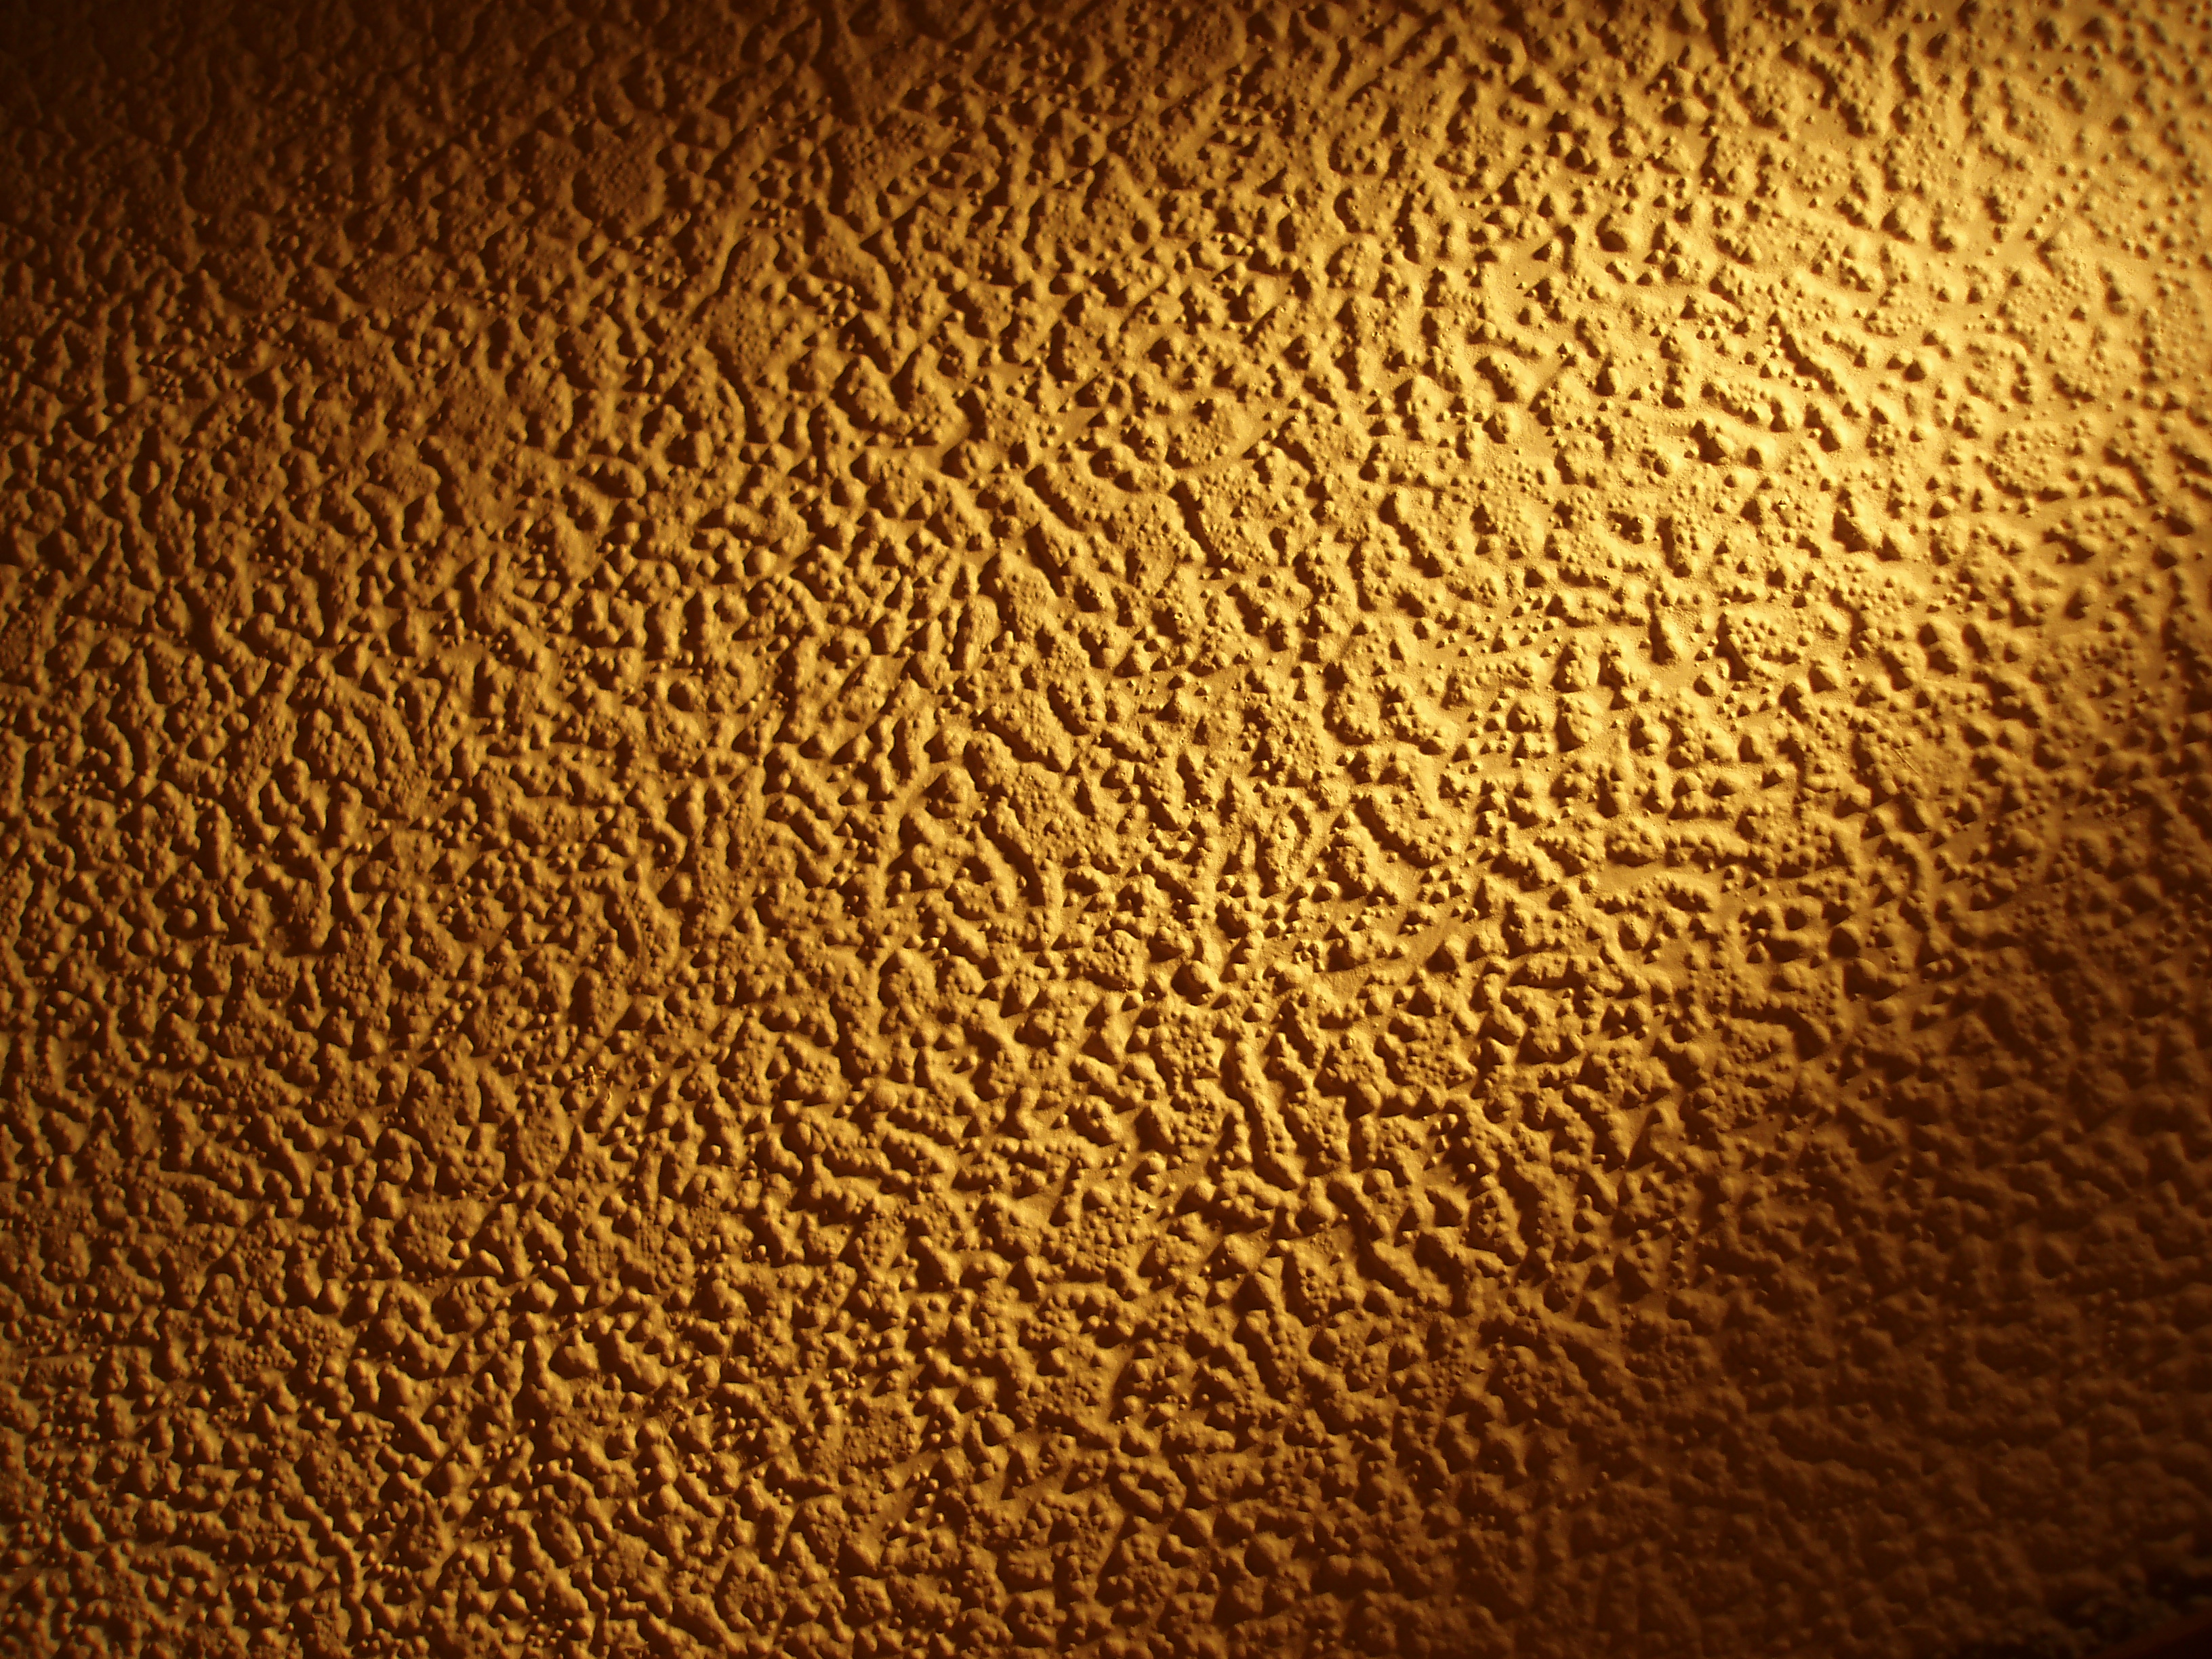 Free Download Tungstan Light Wall Backgrounds And Textures Cr103com 3264x2448 For Your Desktop Mobile Tablet Explore 50 Texture Wallpaper For Walls Texture Wallpaper For Walls Texture Walls Over Wallpaper Texture Wallpapers